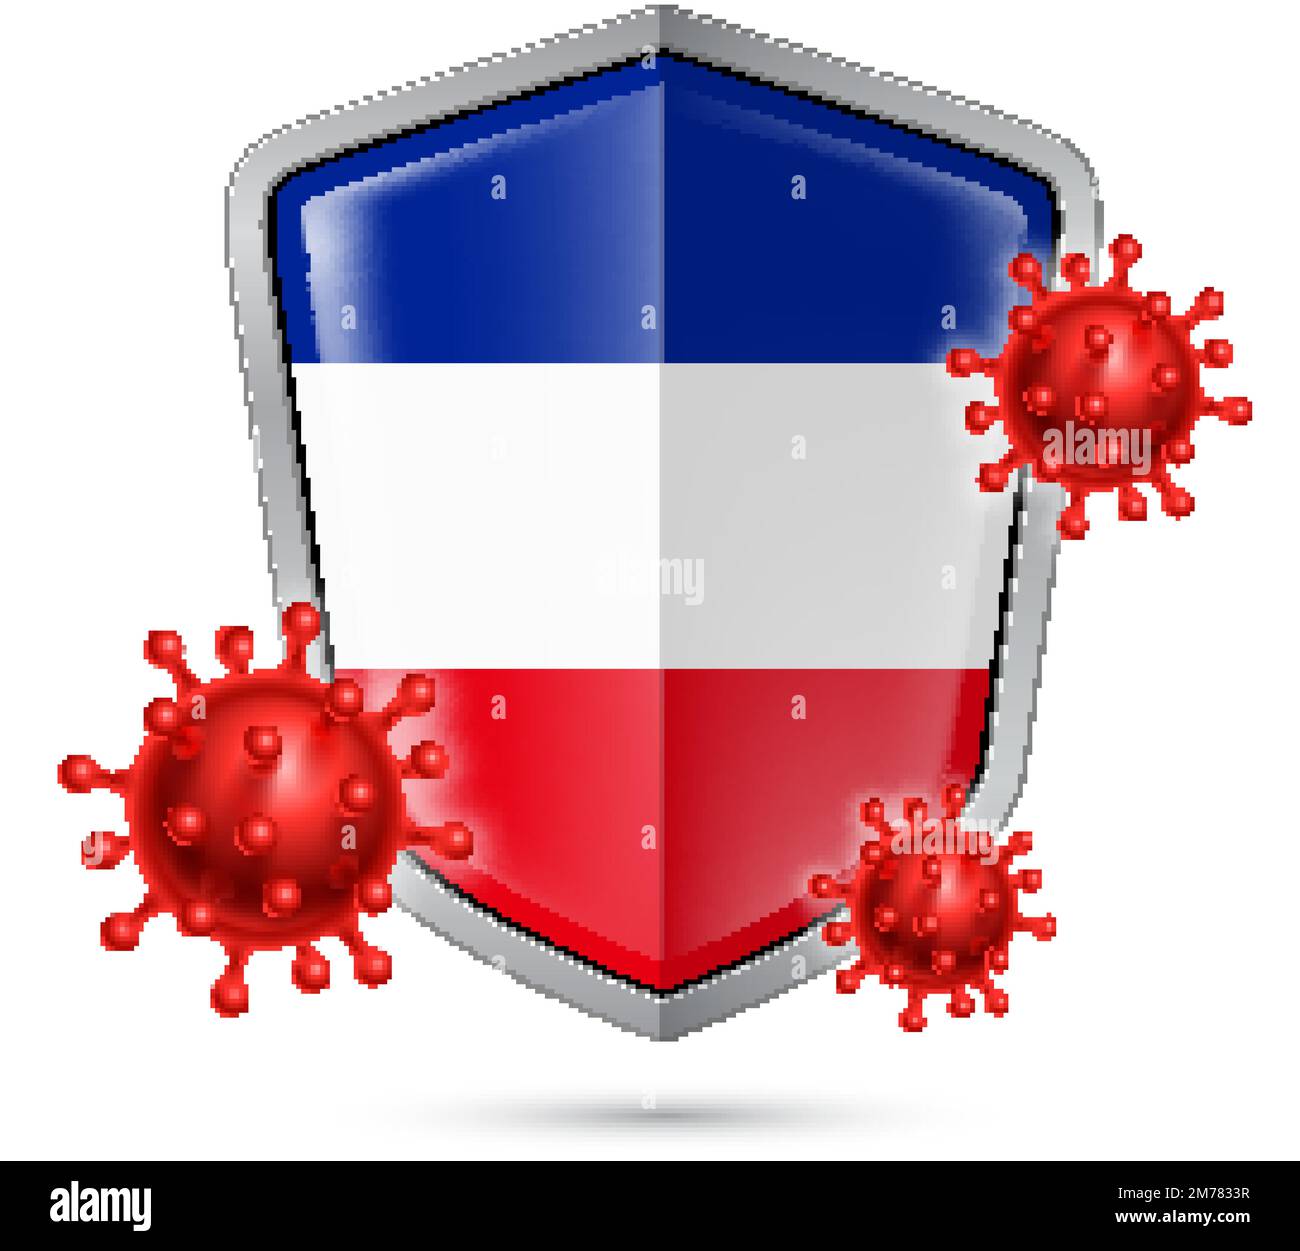 Flag of Yugoslavia on Metal Shiny Shield Icon and Red Corona Virus Cells. Concept of Health Care and Safety Badge. Security Safeguard Metal Label with Stock Vector